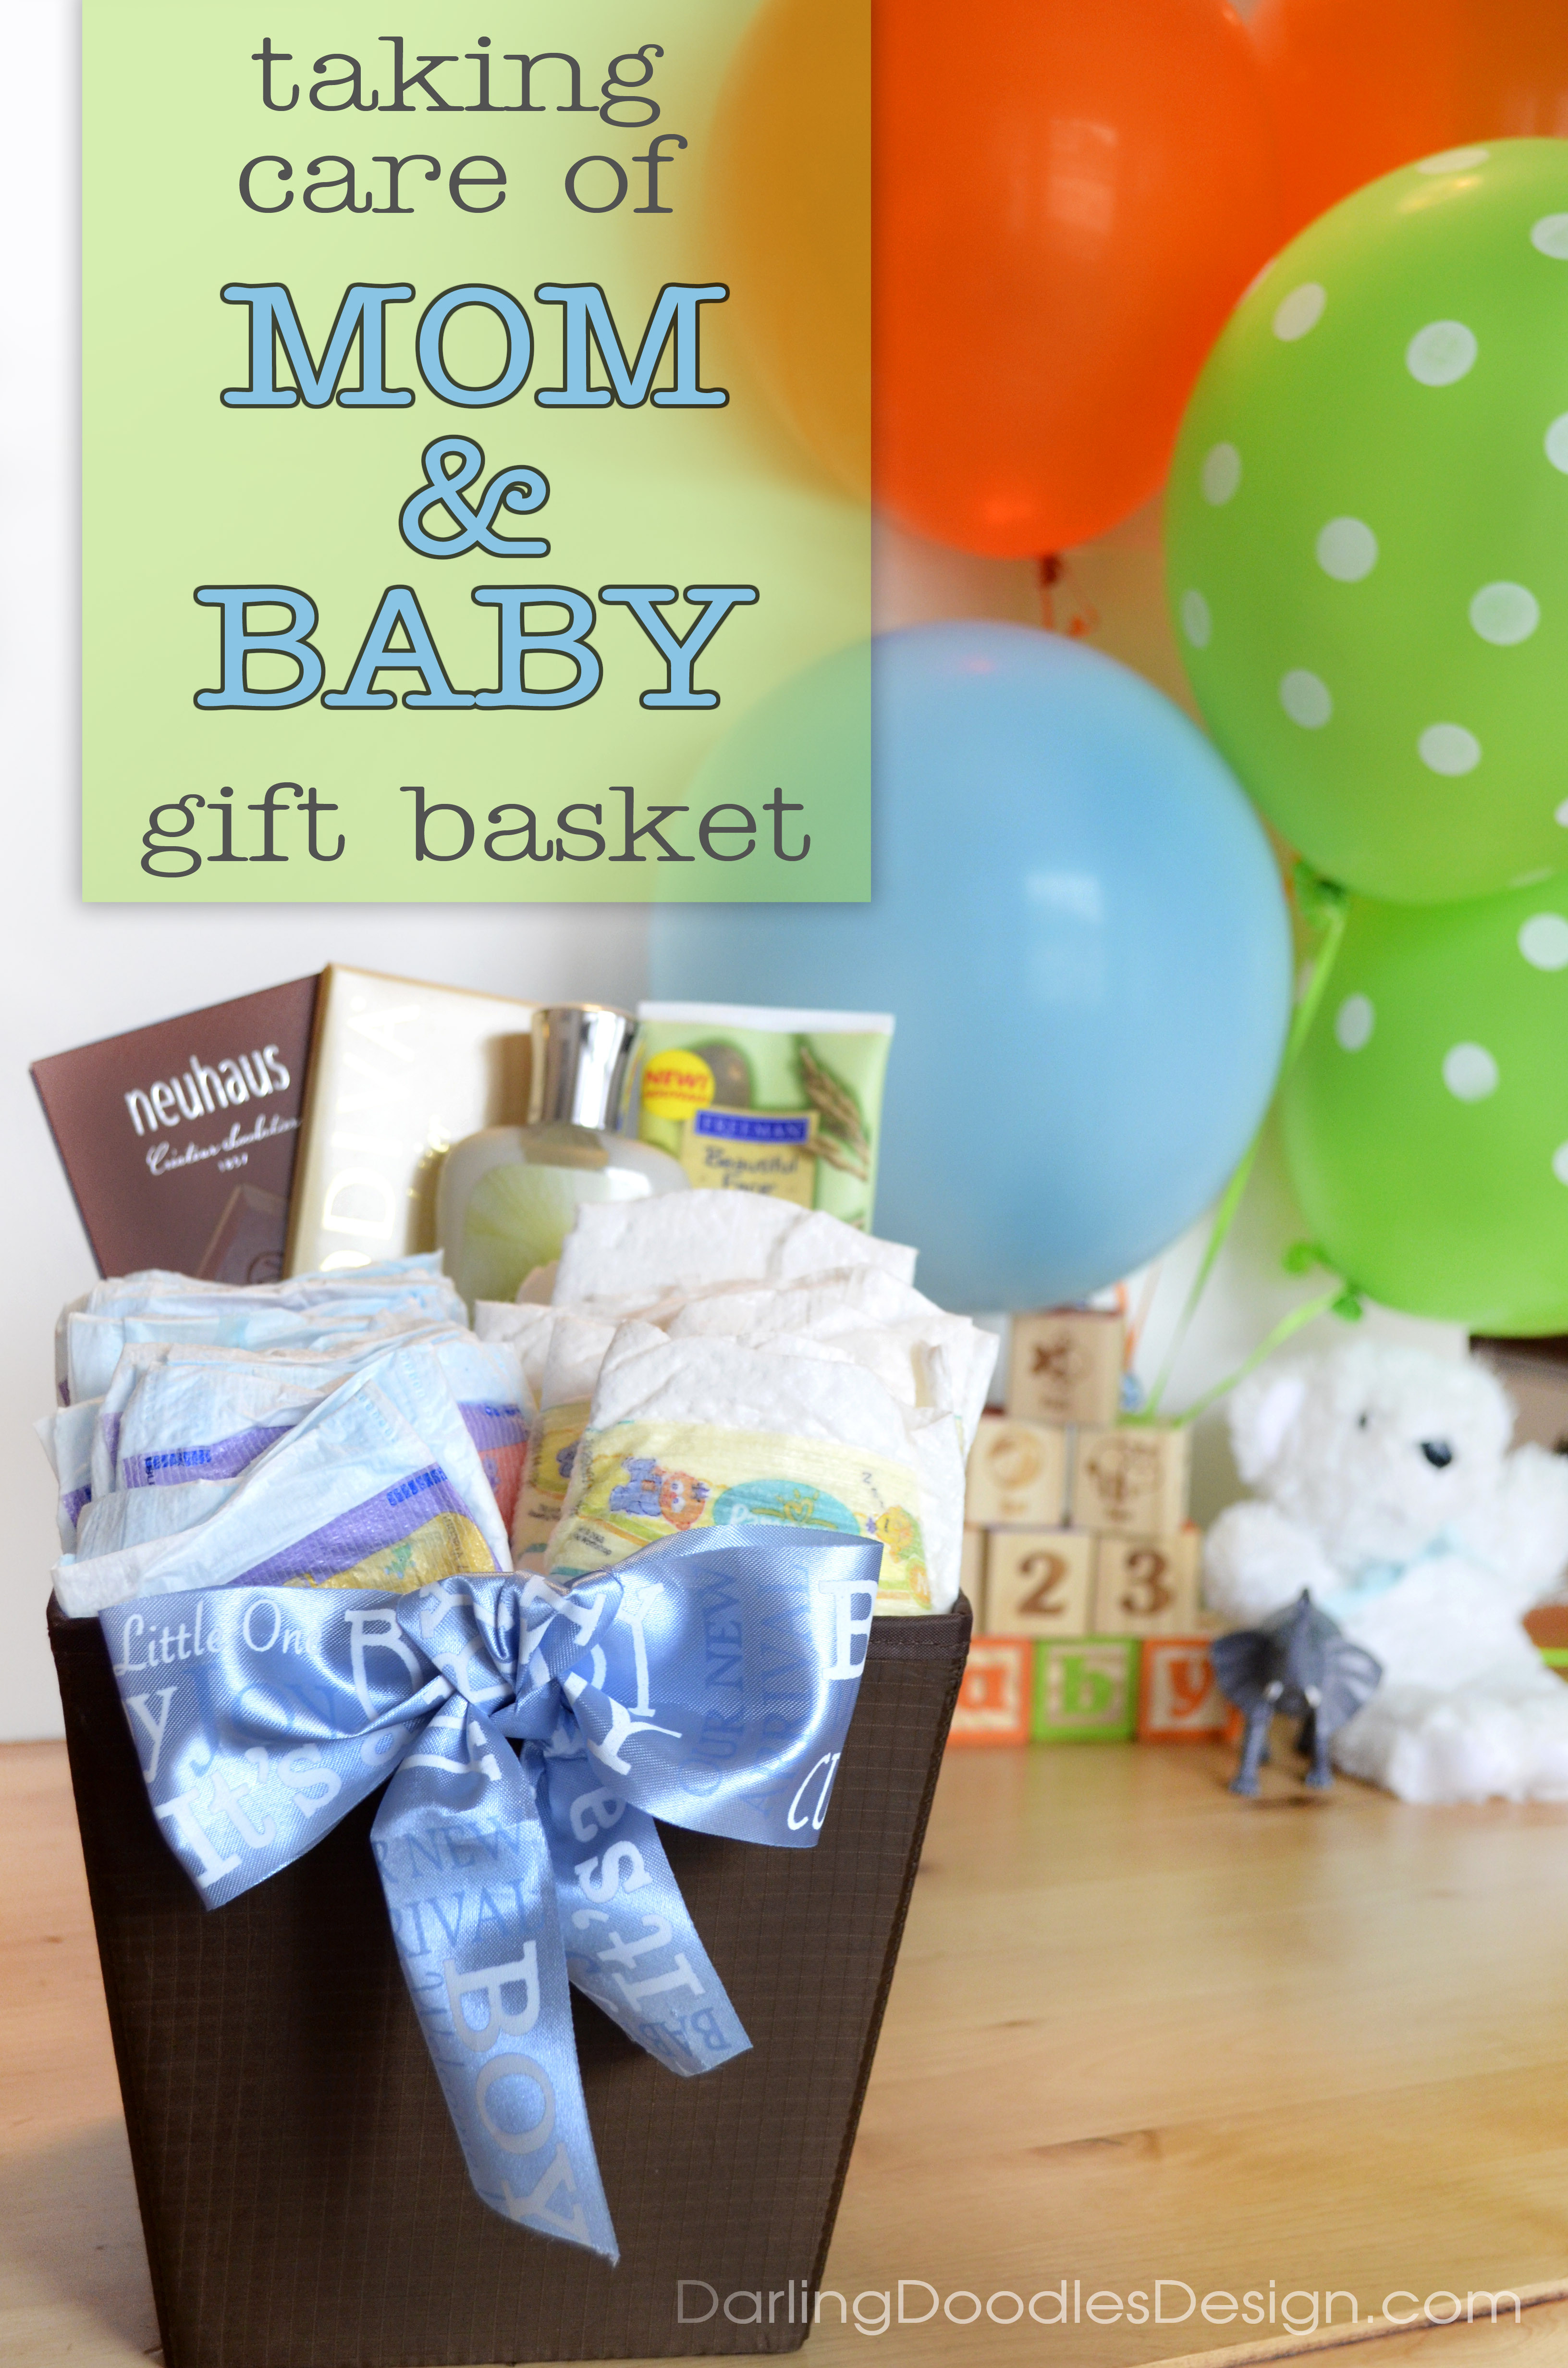 Baby Shower Gift Ideas For Mom
 A Baby Shower Gift for Mom & Baby Darling Doodles